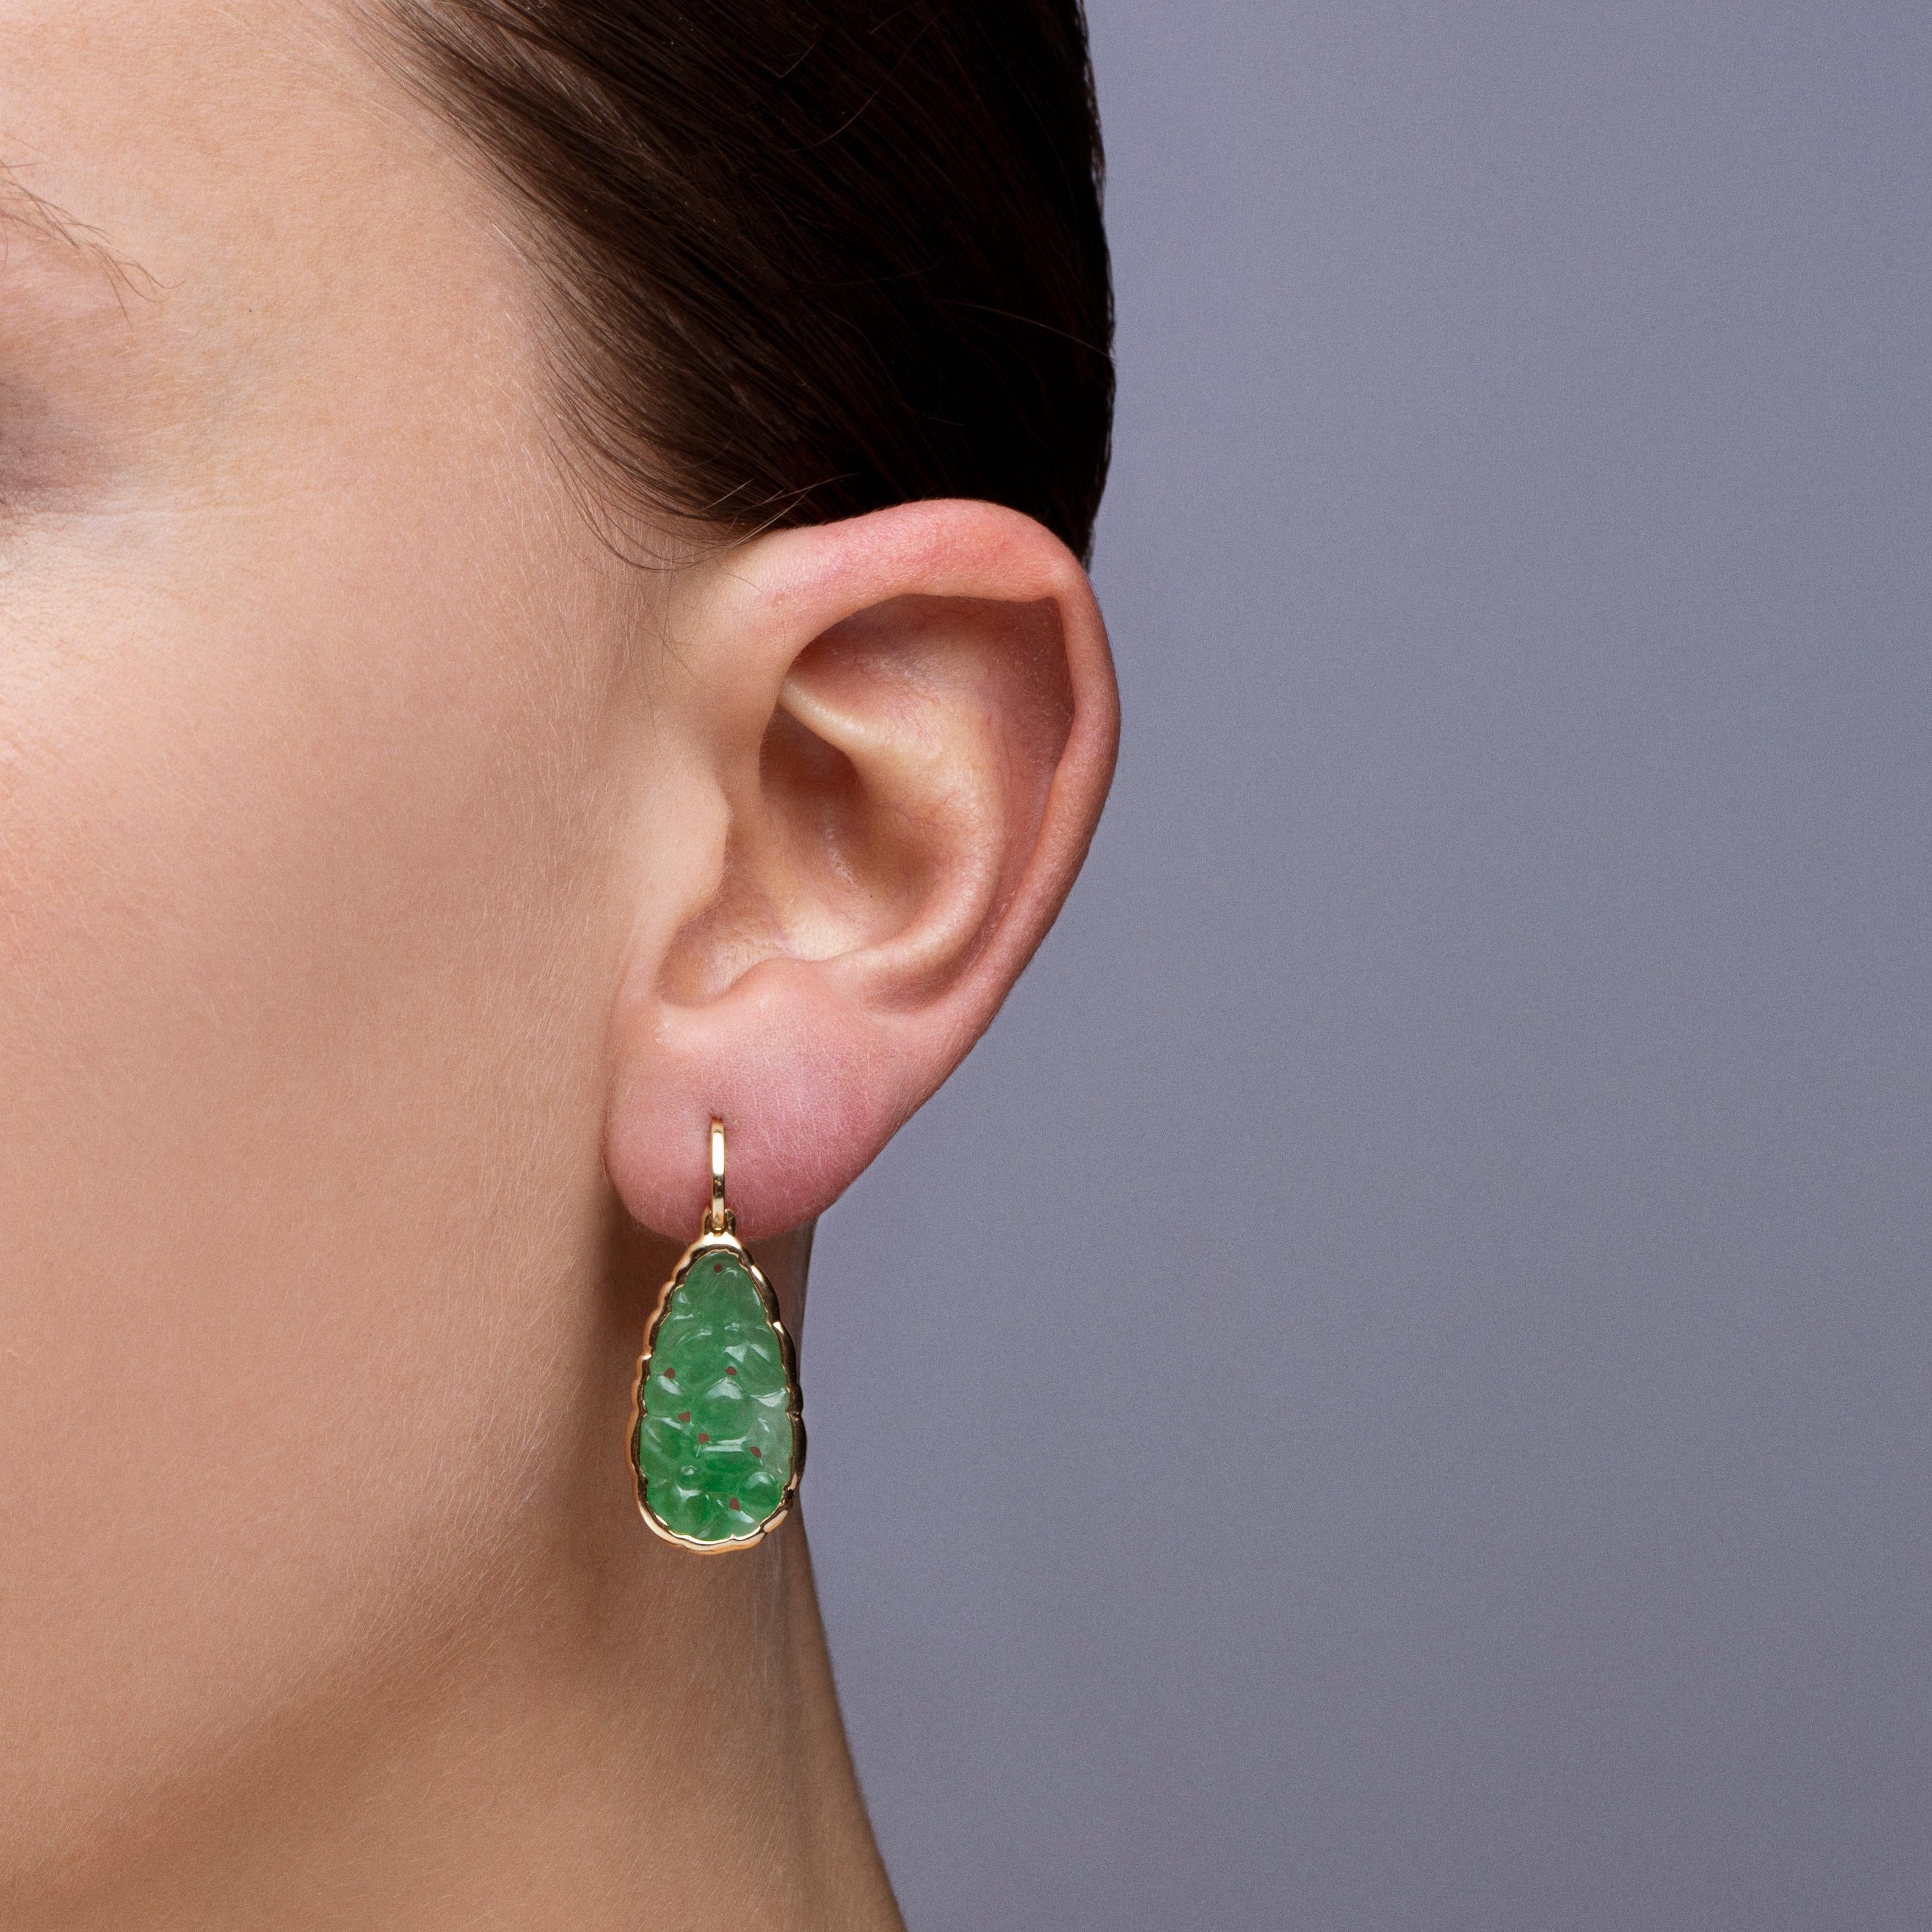 Alex Jona design collection, hand crafted in Italy, 18 karat yellow gold carved burmese jadeite jade pendant earrings weighing 10.96 carats.
Dimensions : H x1.17 in, W 0.46 in. -H x 29.72 mm, W x 11.69 mm. 

Alex Jona jewels stand out, not only for